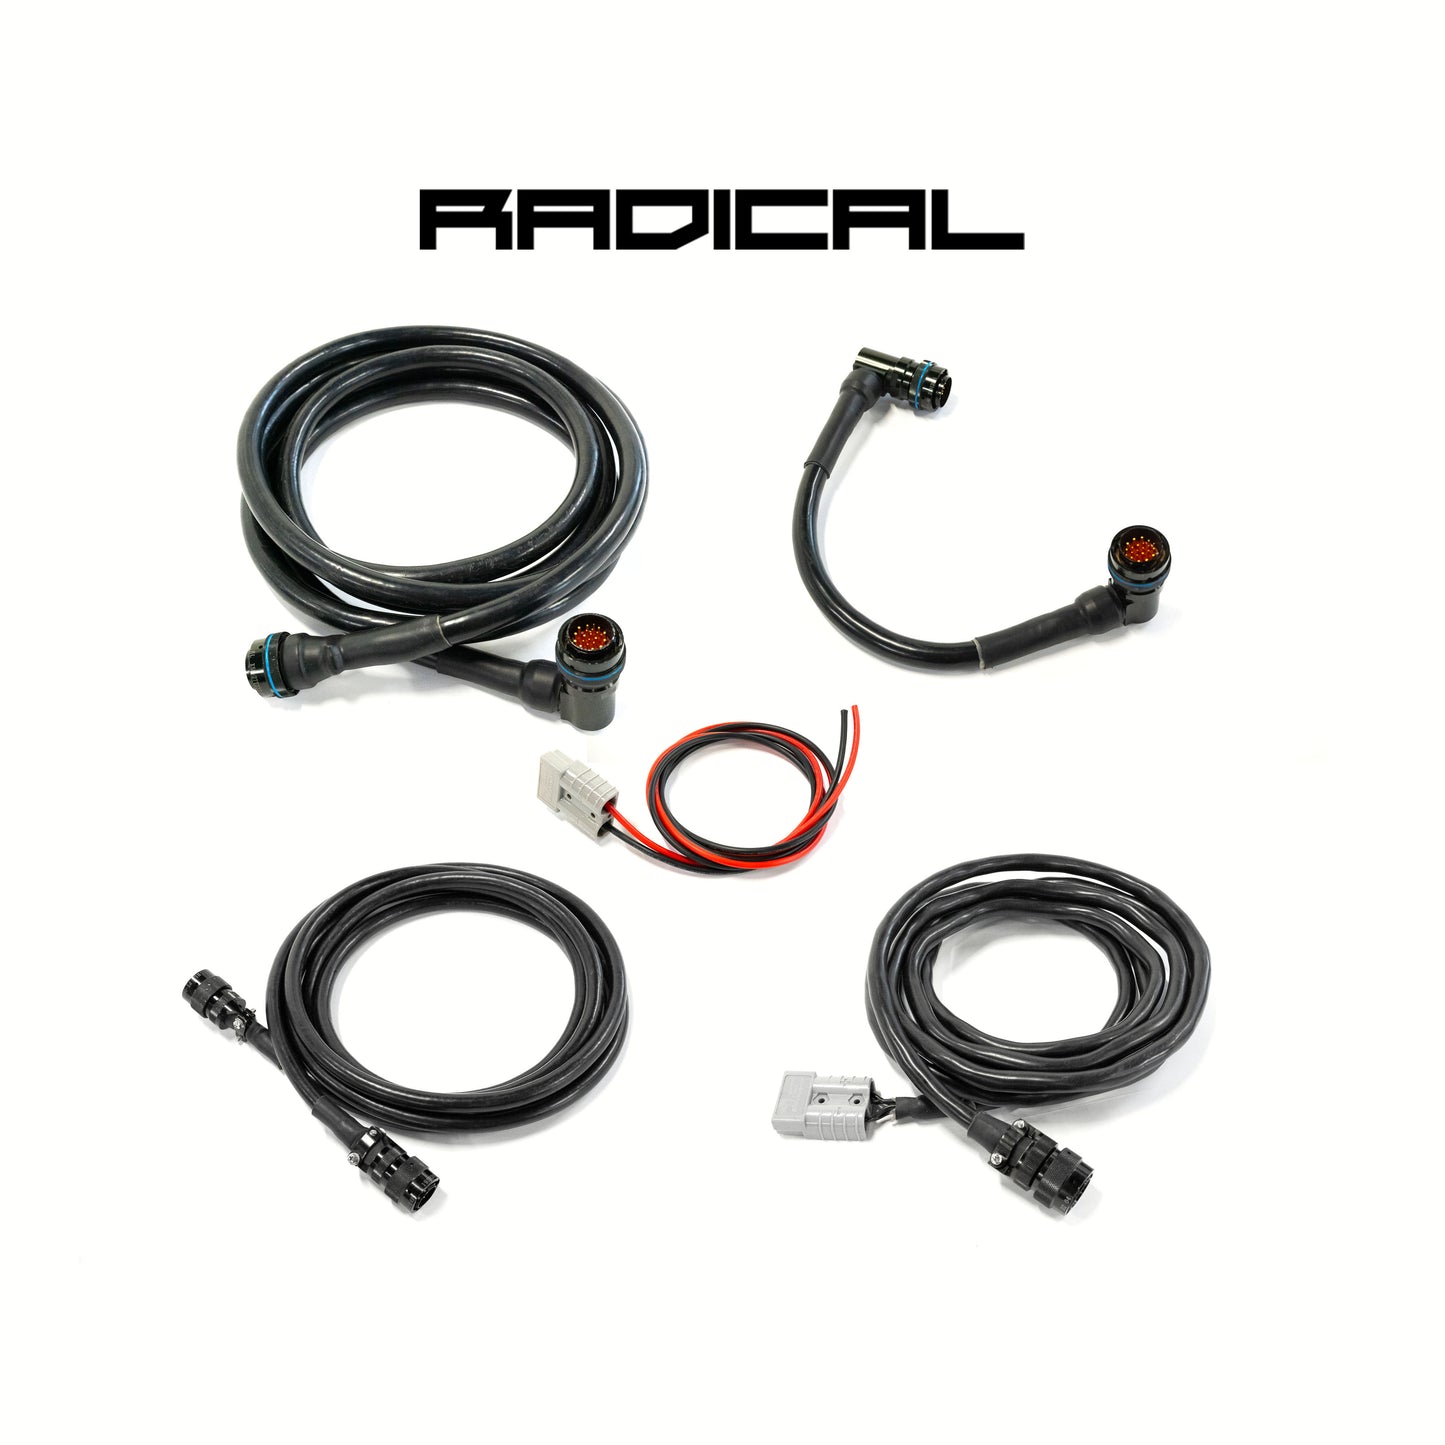 RADICAL 5-Piece Cable Set